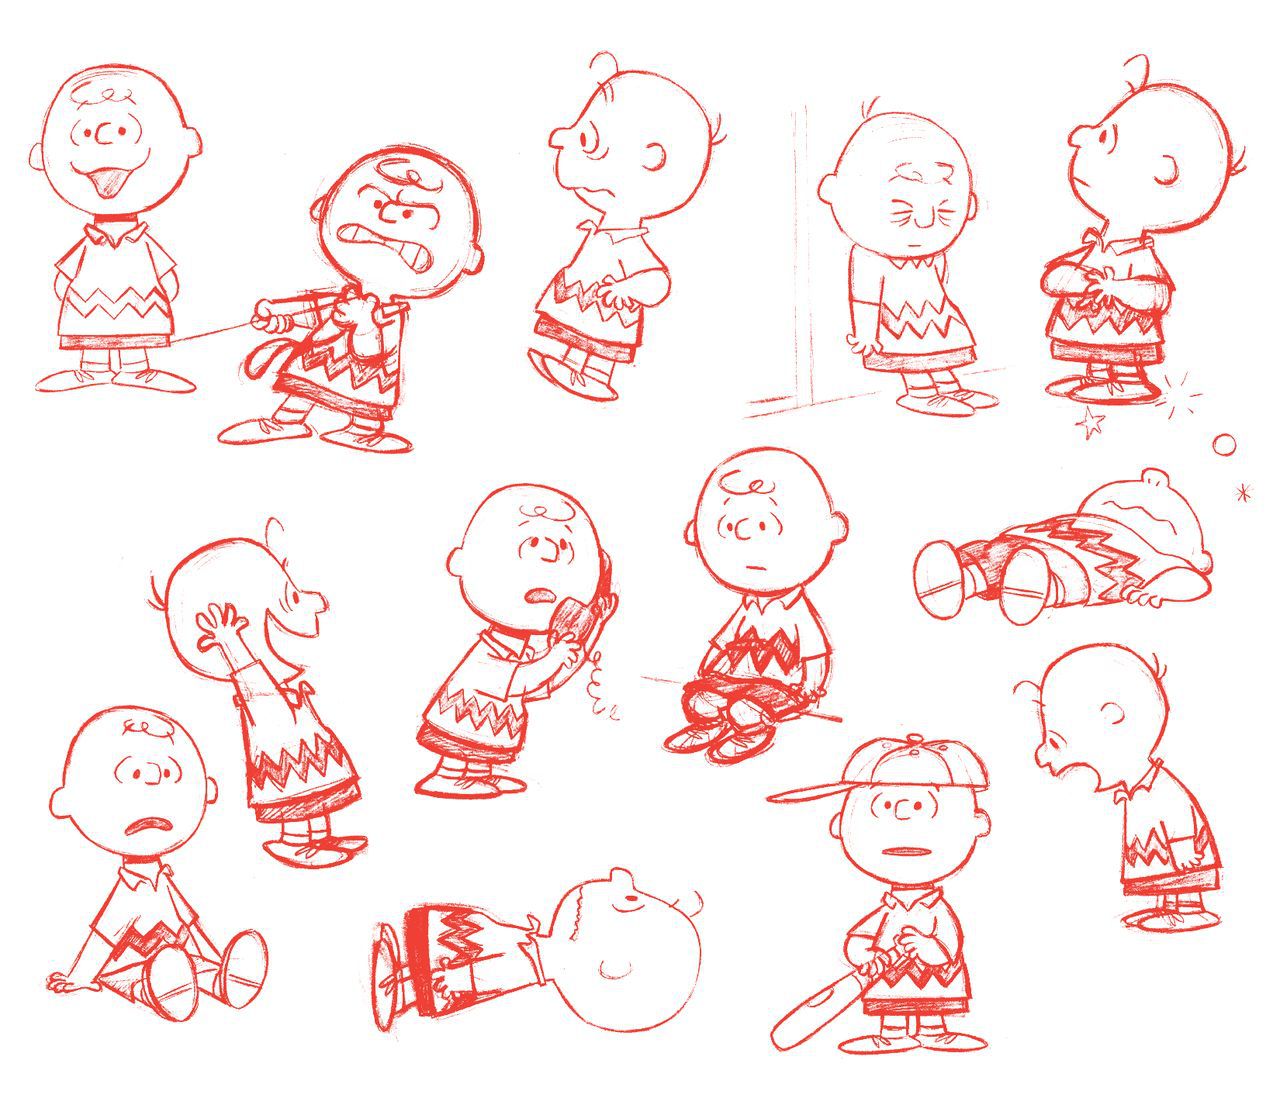 The Art and Making of Peanuts Animation 3